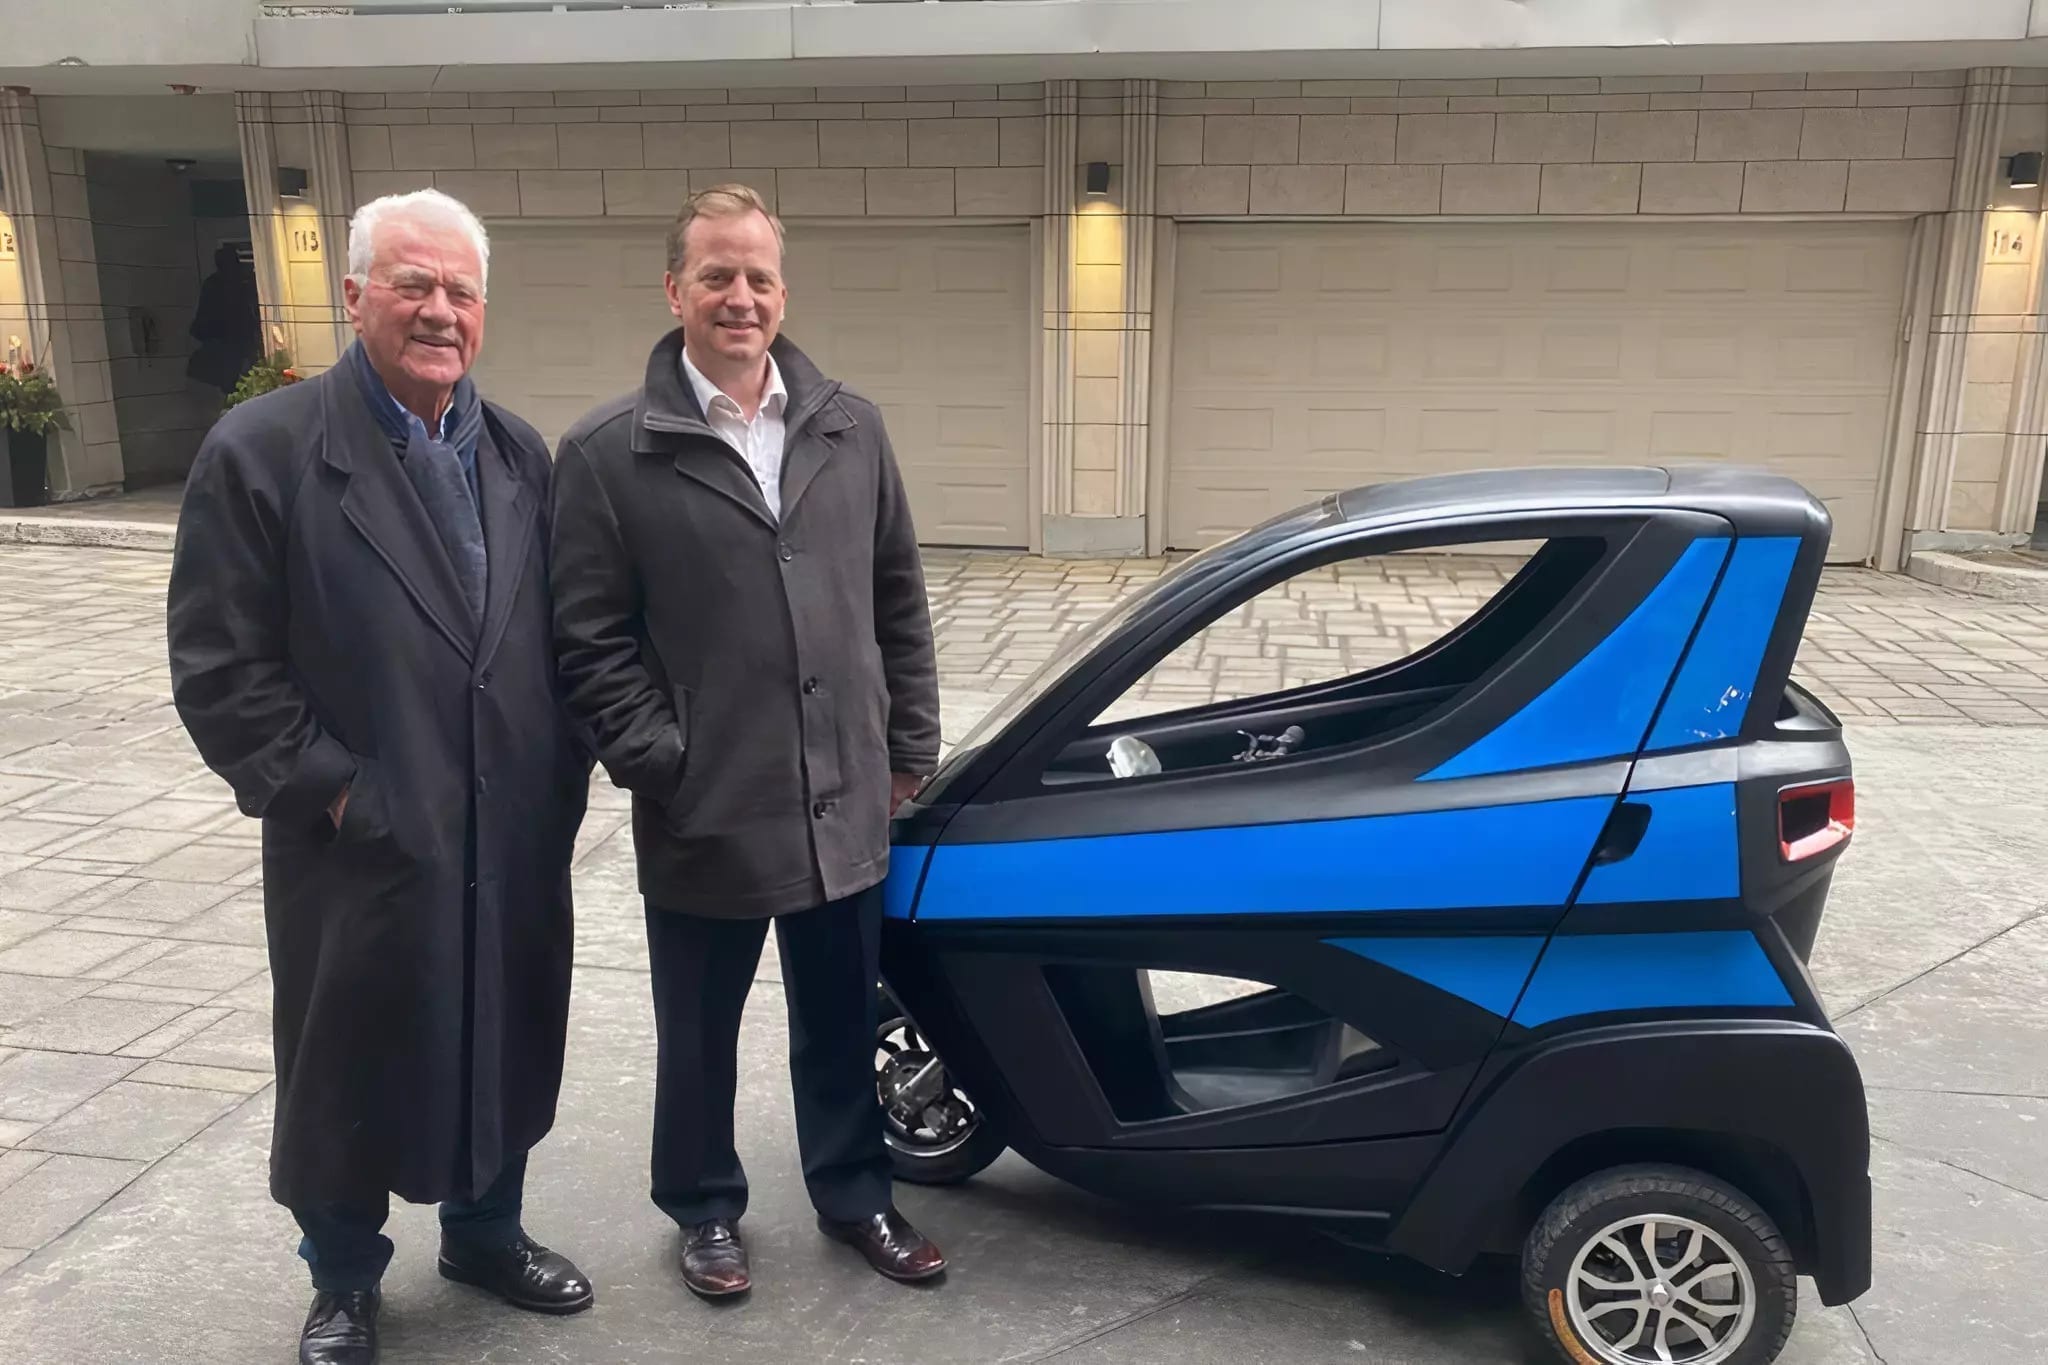 Stronach has plan to build electric cars in Canada